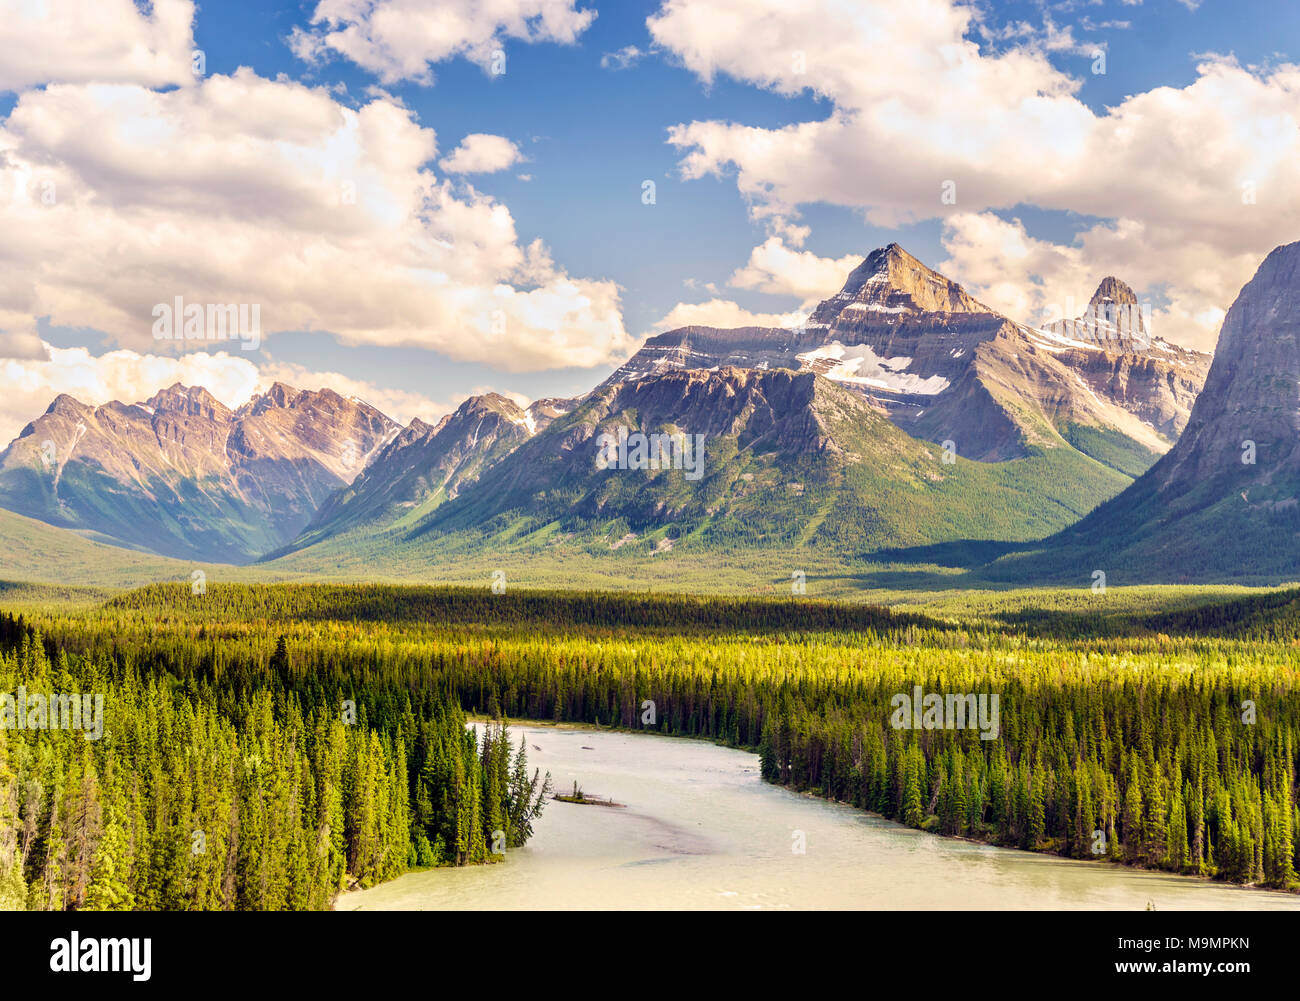 Landscape of Rockies mountain and Athabasca river, Jasper National Park, Alberta, Canada Stock Photo